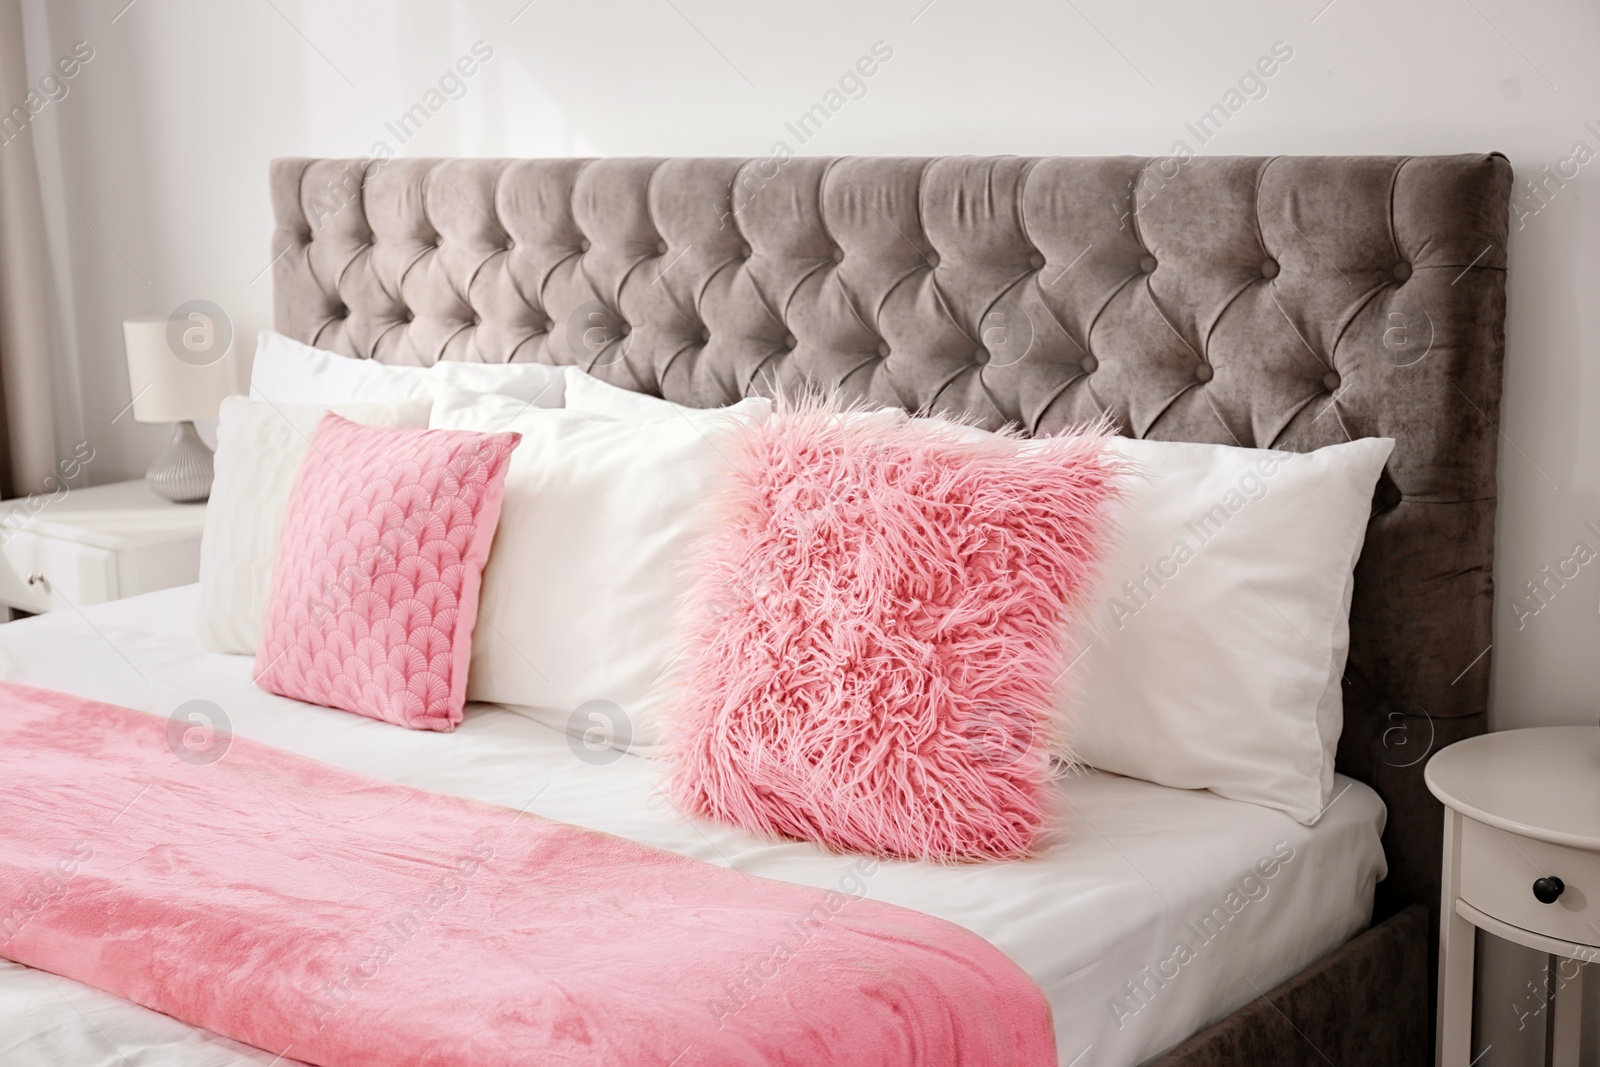 Photo of Fluffy pillows on bed in hotel room